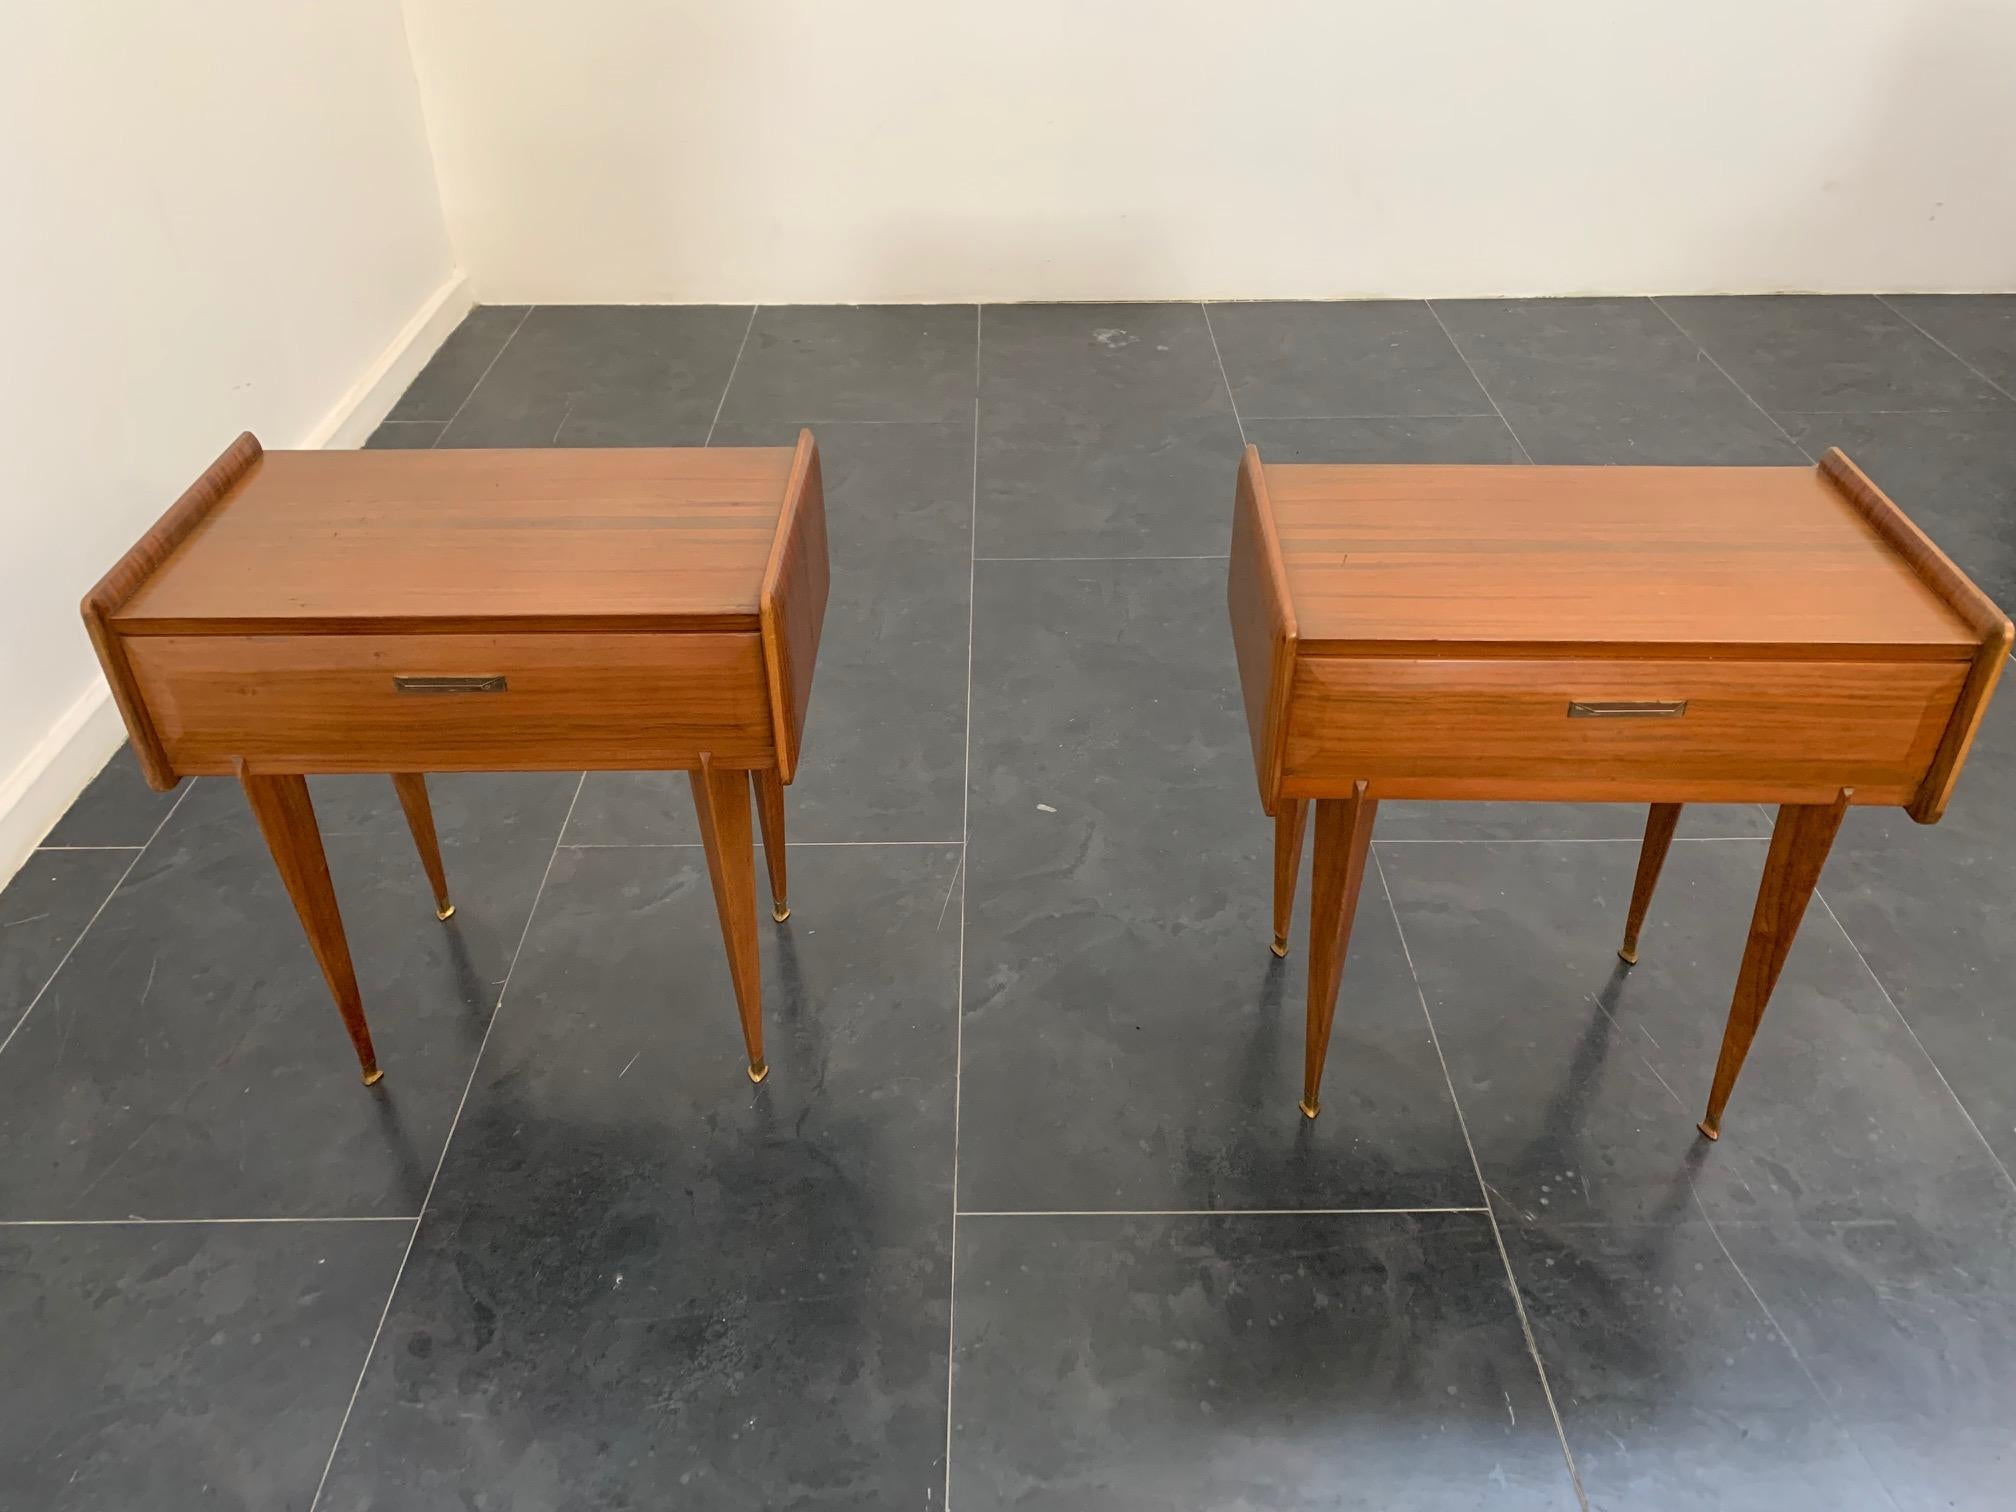 Pair of rosewood bedside tables, 1950s. Featuring pyramidal spiked legs with elegant brass tips. The sides are shaped and domed and extend to accommodate the body and top. The front features a rusticated drawer with a gilded metal handle. The wood